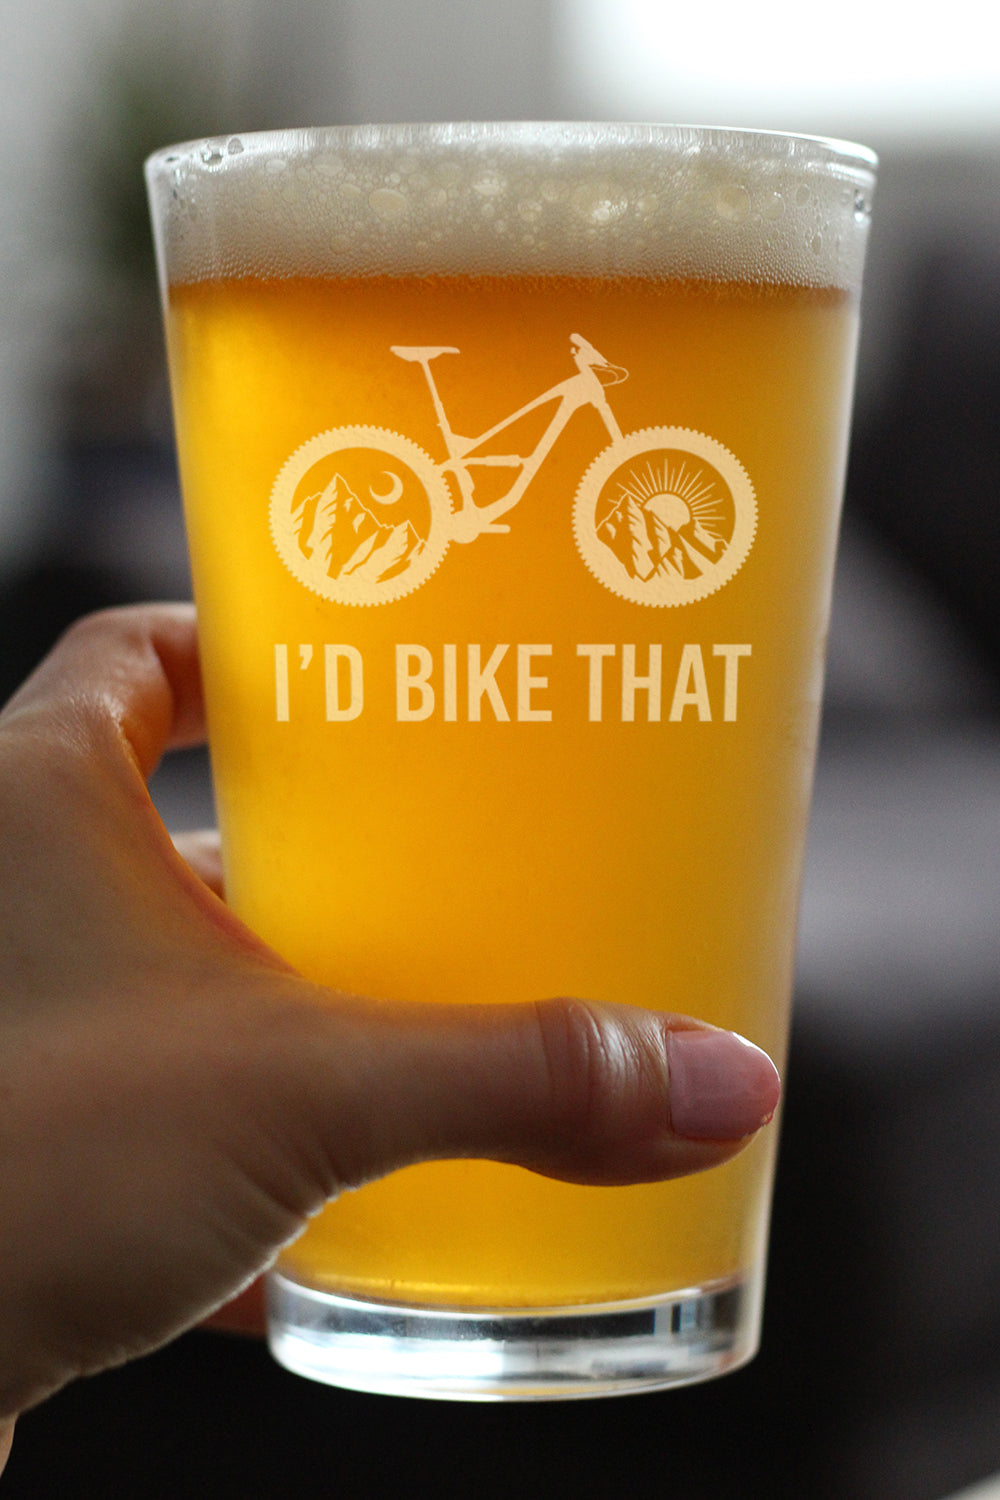 I&#39;d Bike That - Pint Glass for Beer - Cool Bicycle Themed Decor and Gifts for Outdoor Lovers - 16 oz Glasses